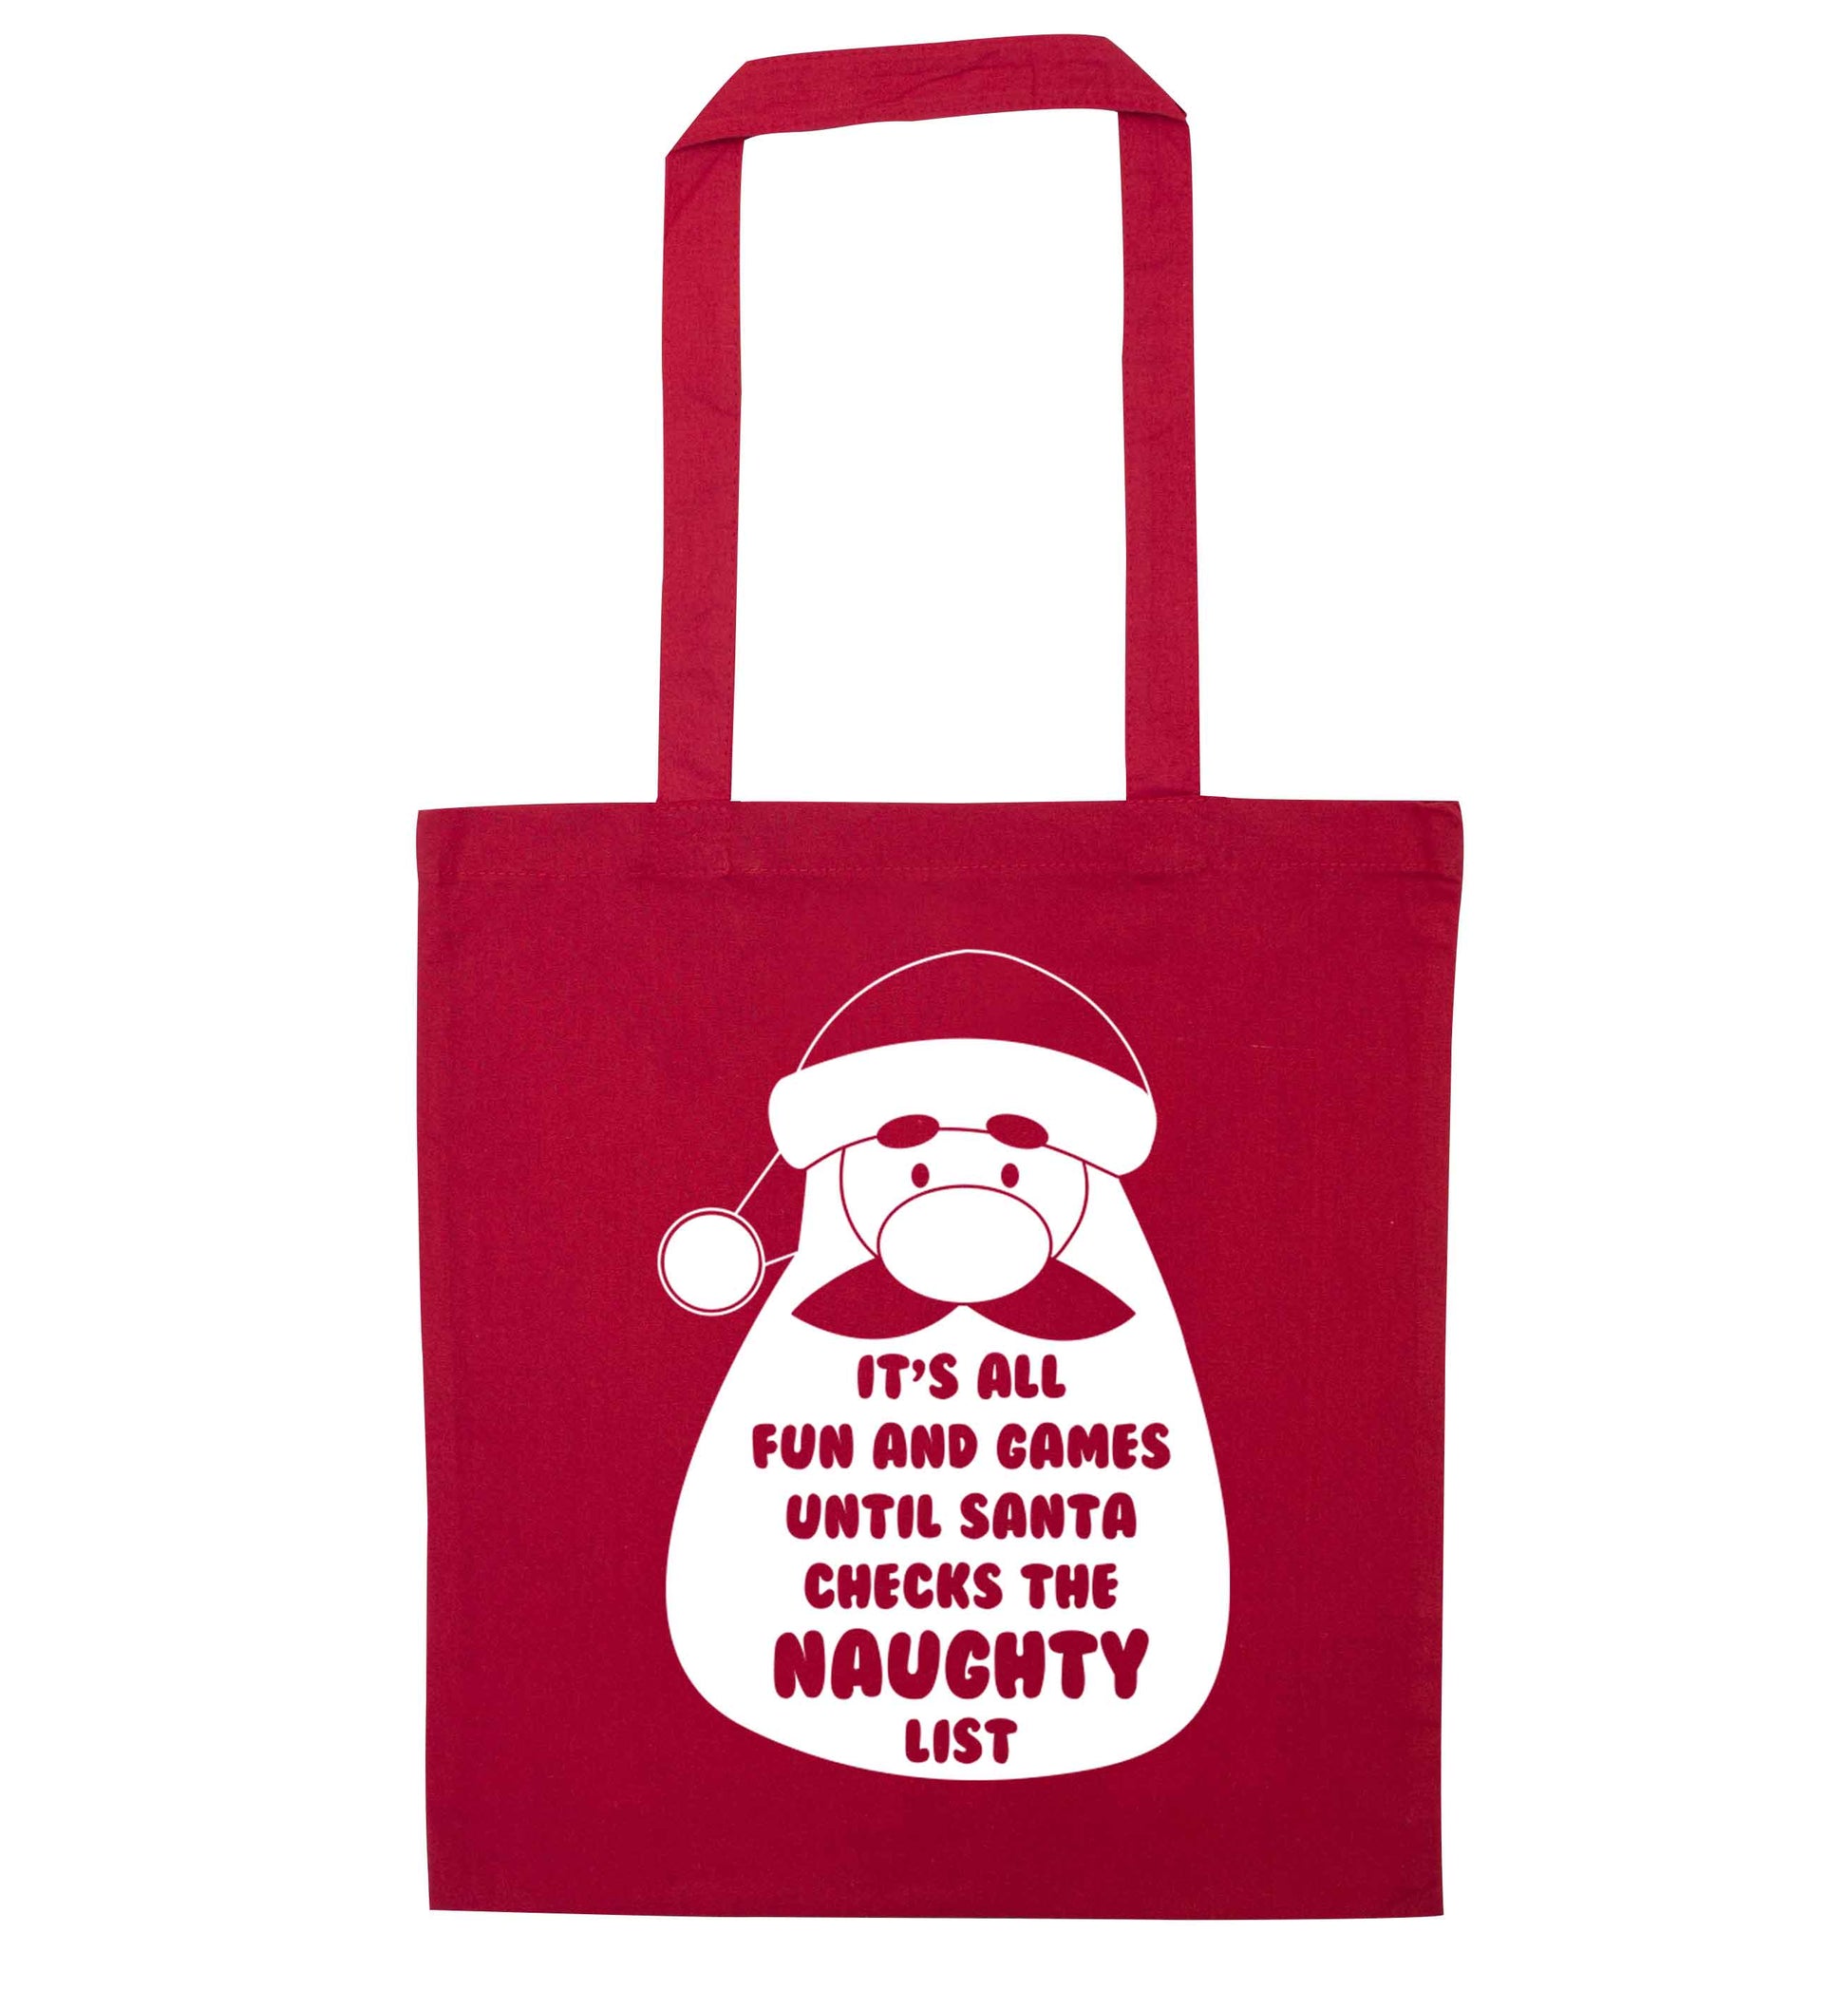 It's all fun and games until Santa checks the naughty list red tote bag